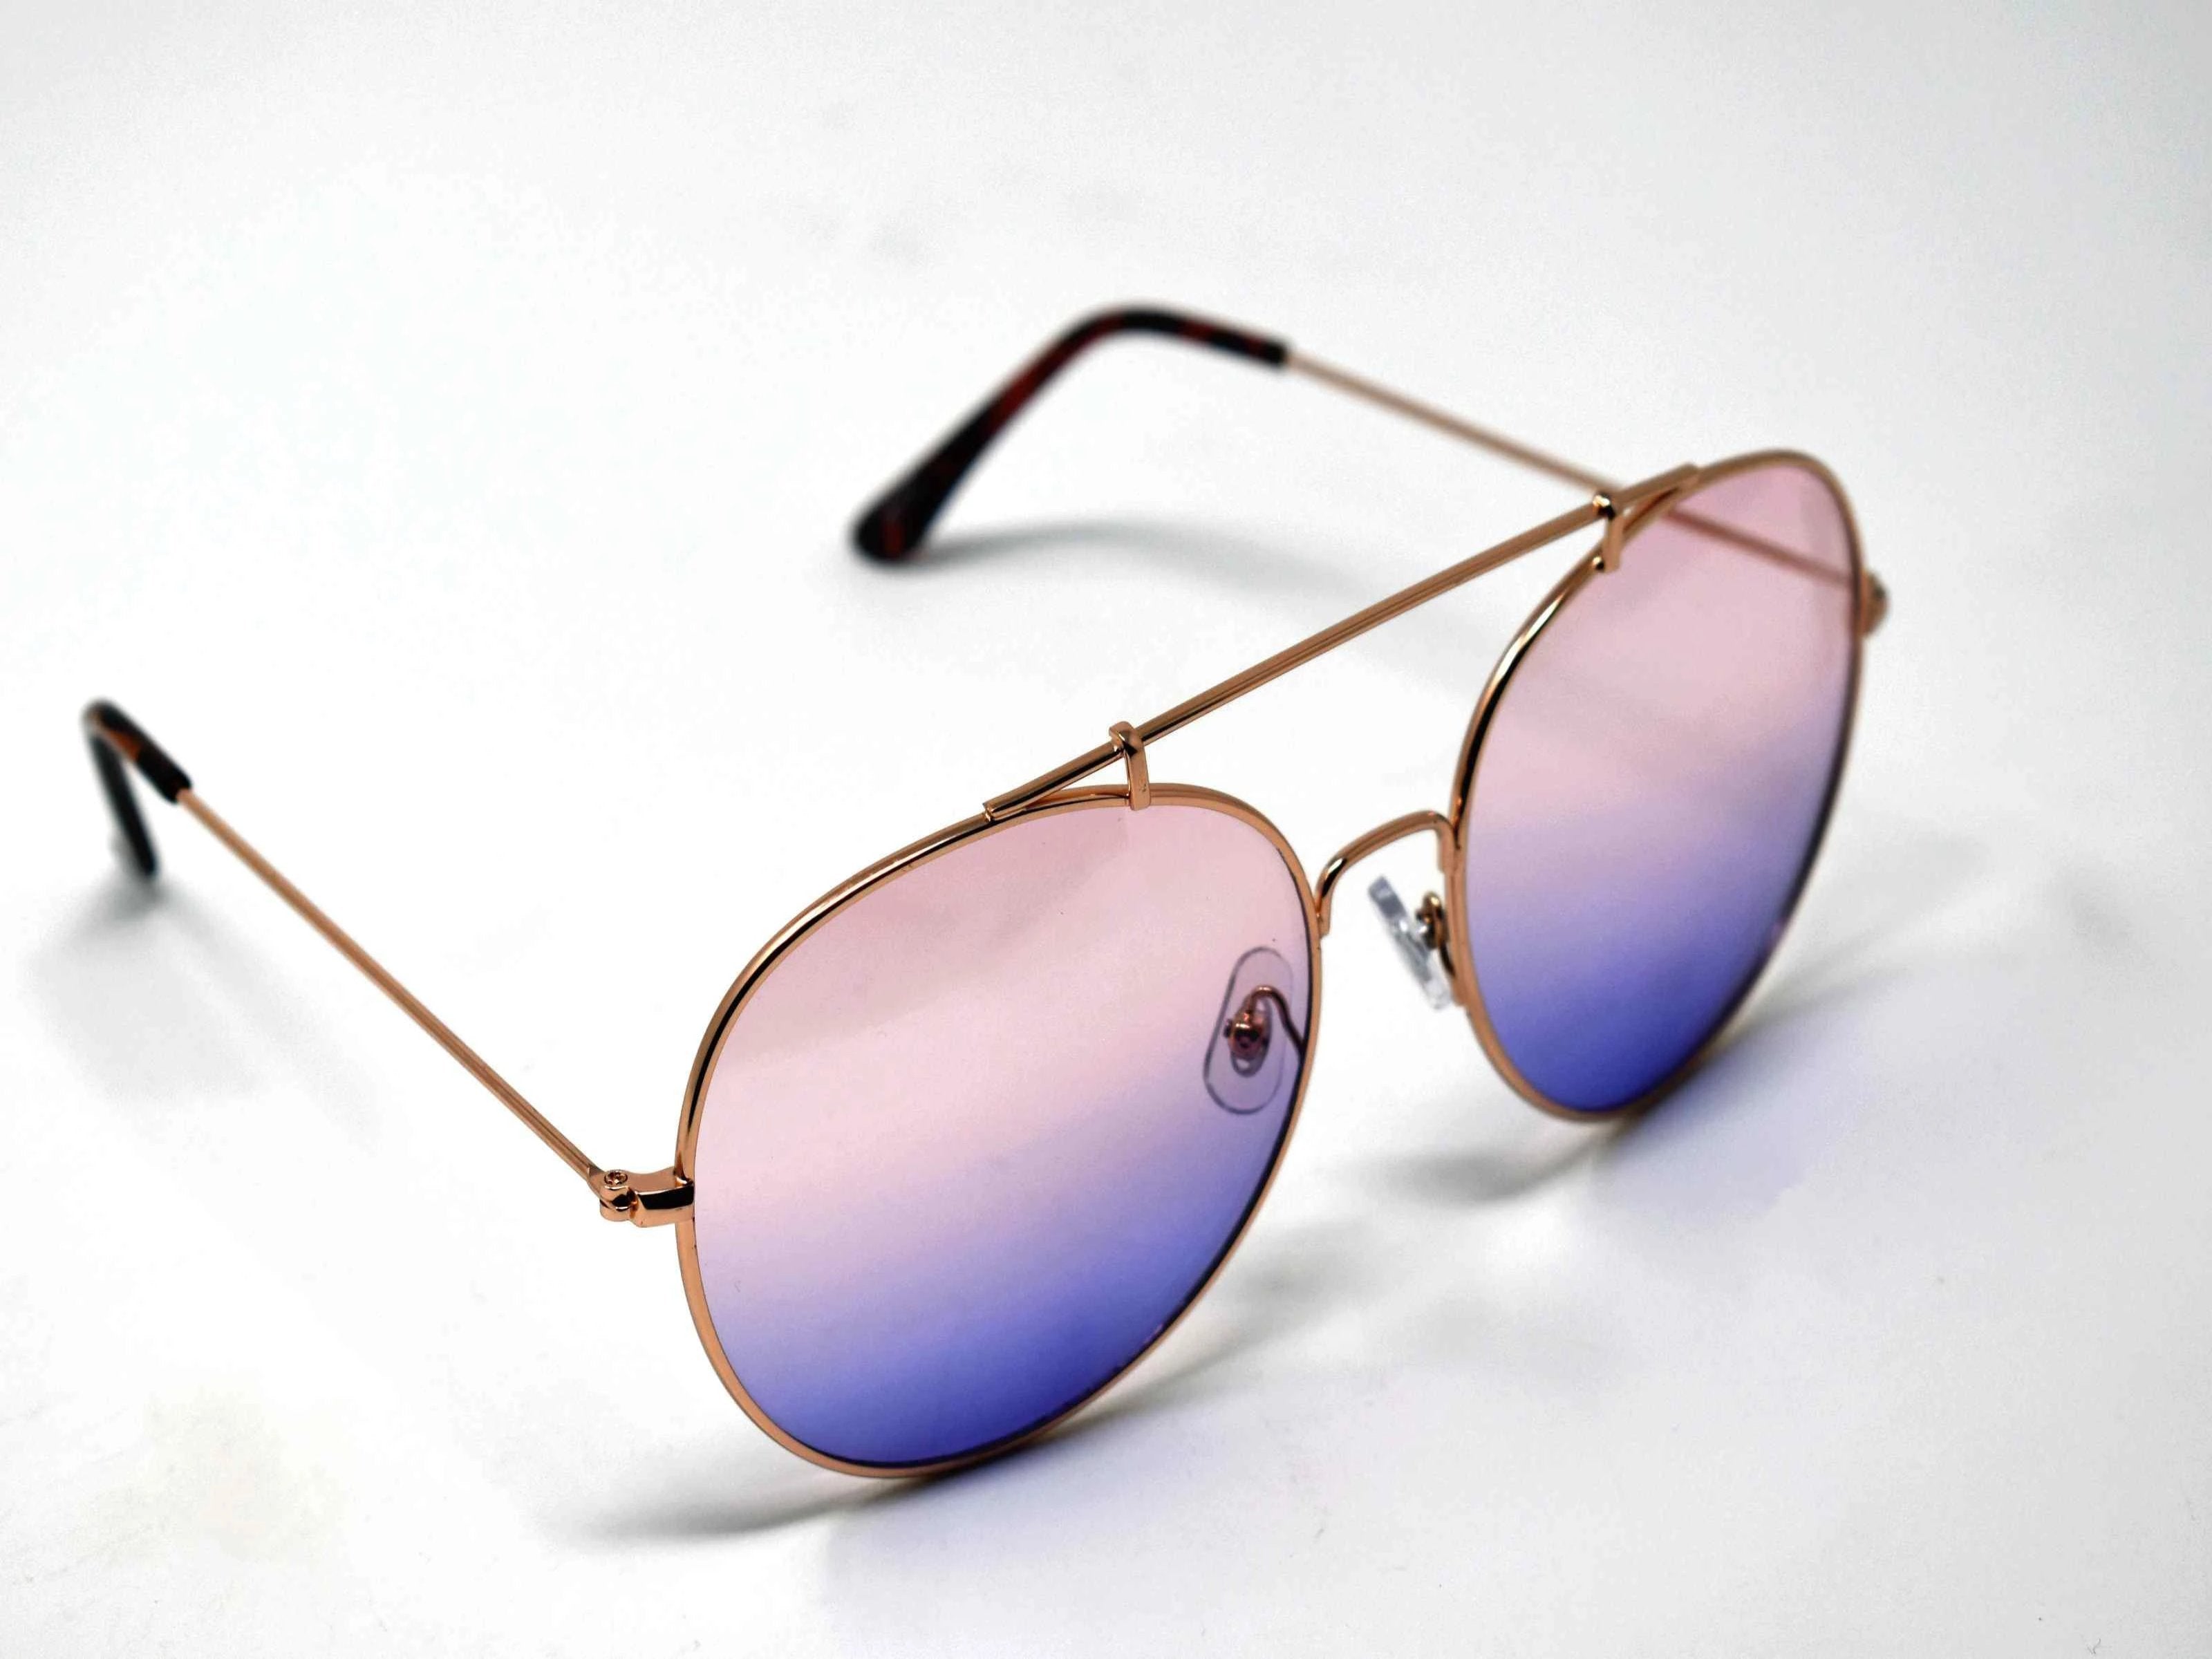 Va Va Voom will be consistently heard in these Vervain gold frame aviator Pink and Blue ombre lens sunglasses.